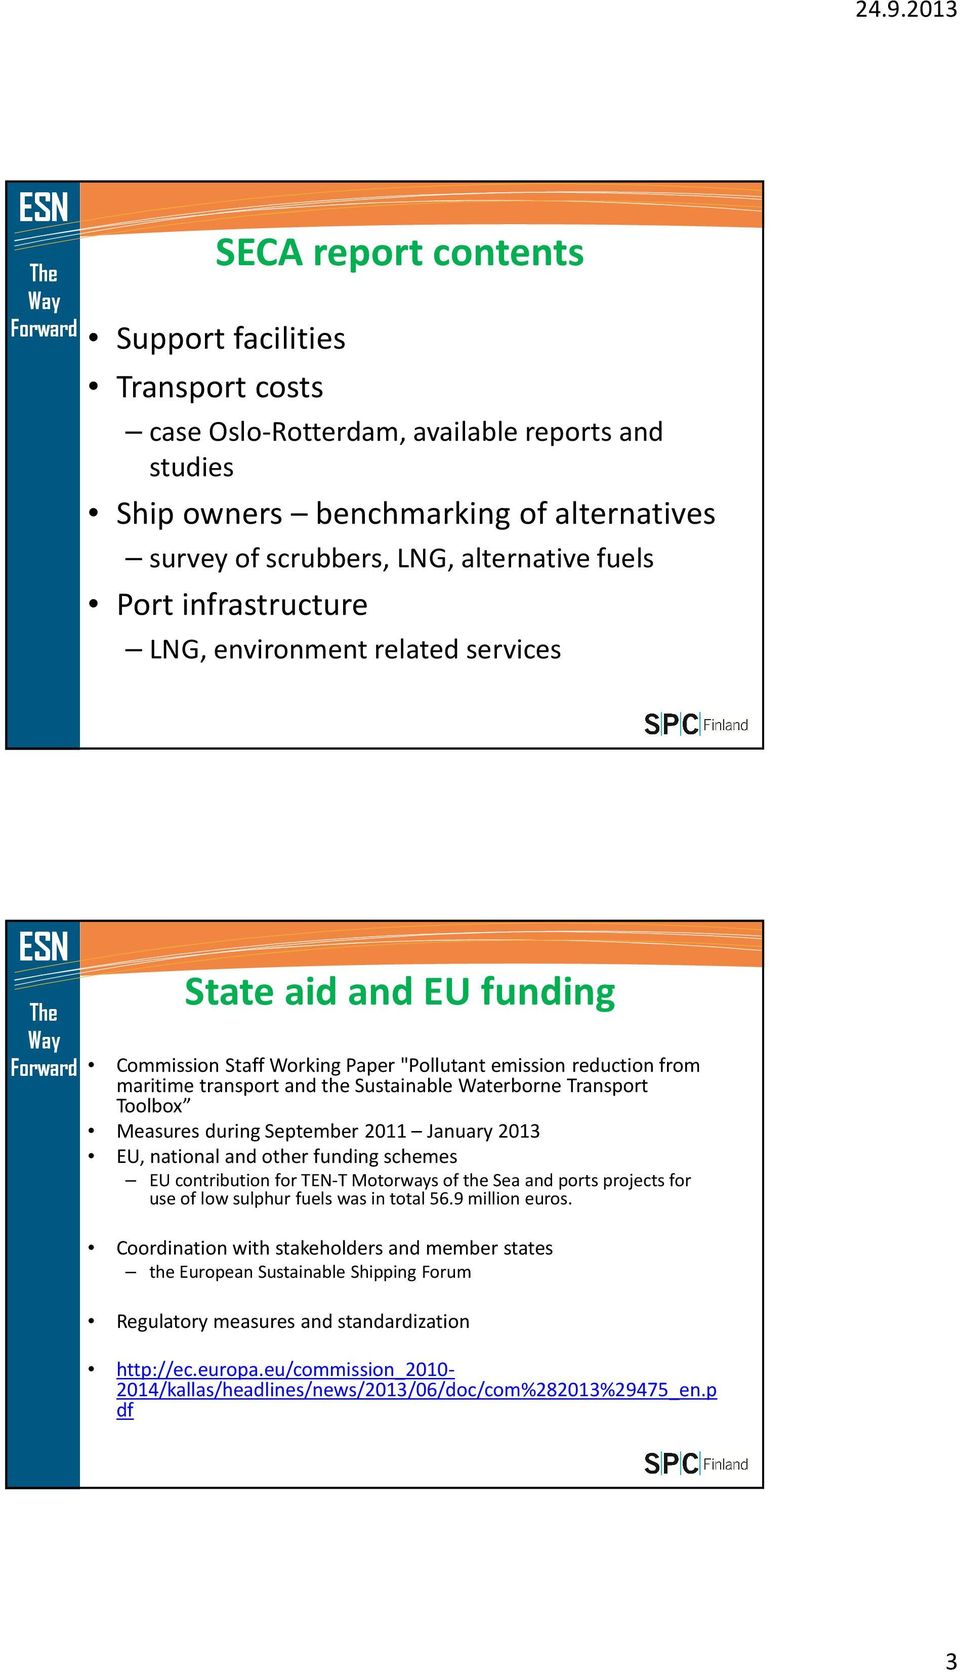 Toolbox Measures during September 2011 January 2013 EU, national and other funding schemes EU contribution for TEN-T Motorways of the Sea and ports projects for use of low sulphur fuels was in total